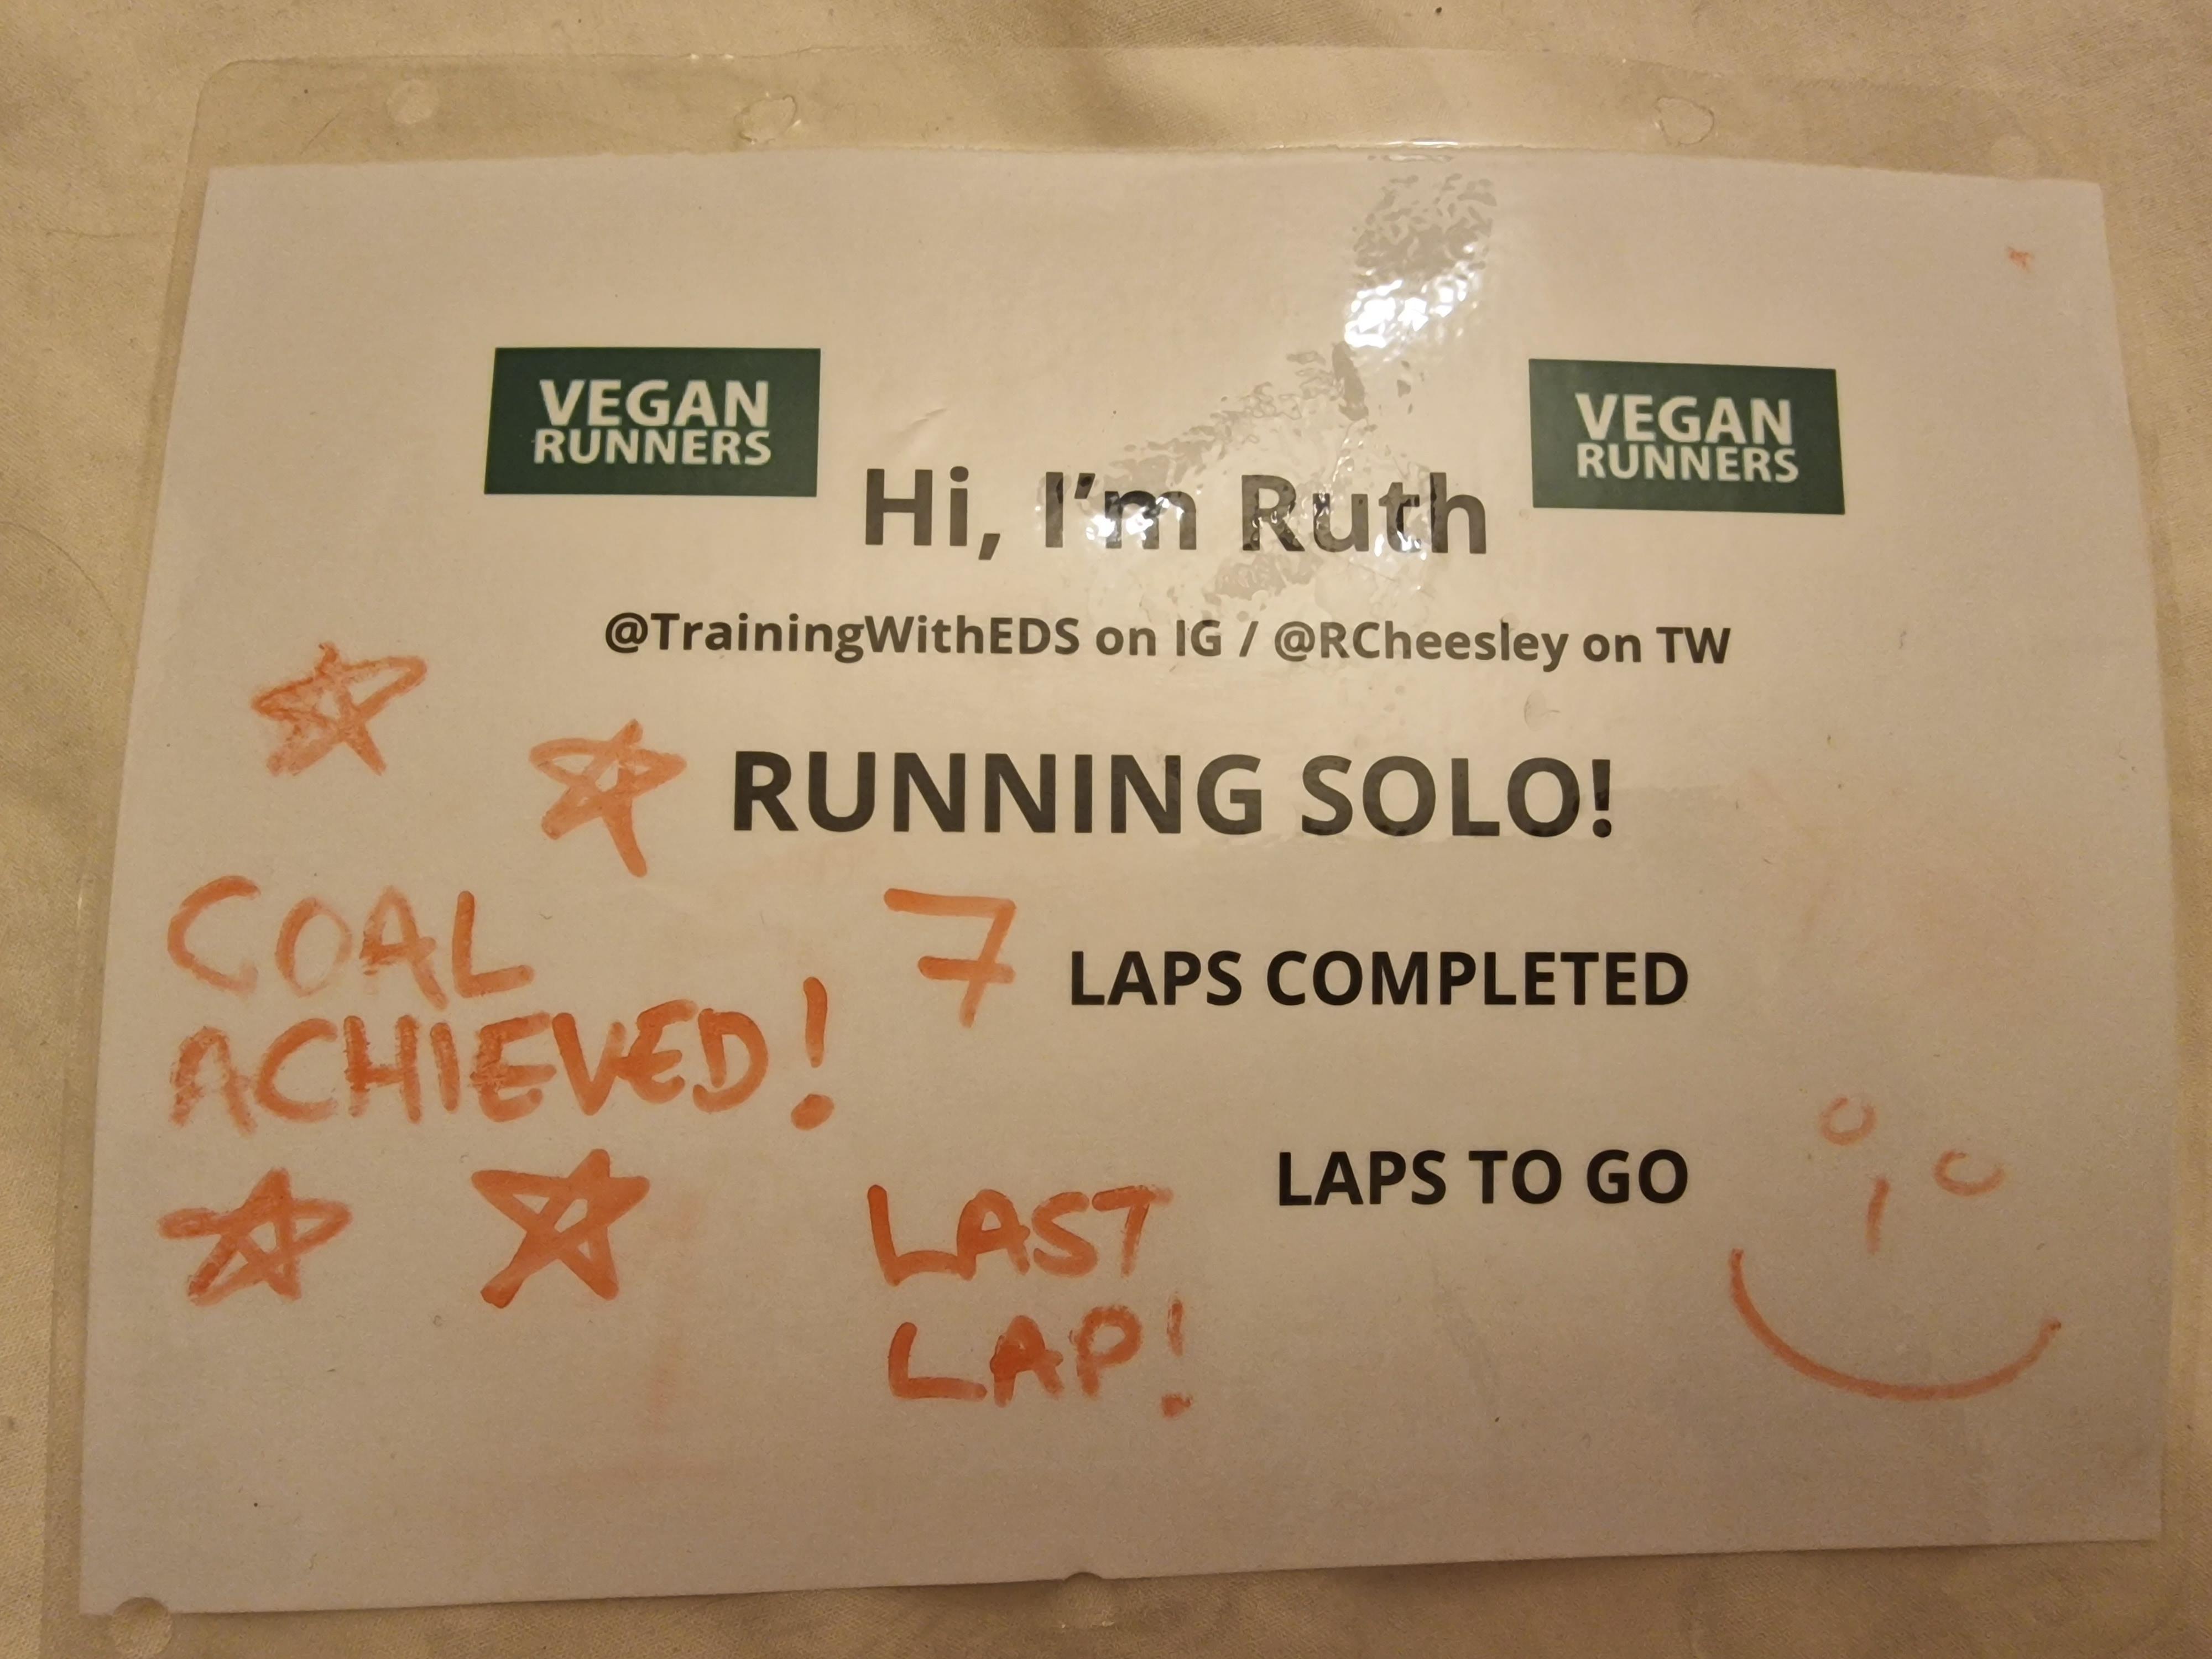 Photo of a laminated sign saying 'Hi I'm Ruth, running solo, 7 laps completed, 0 laps to go with 'Goal achieved' and 'Last lap' written in red pen and vegan runners logos on the top.